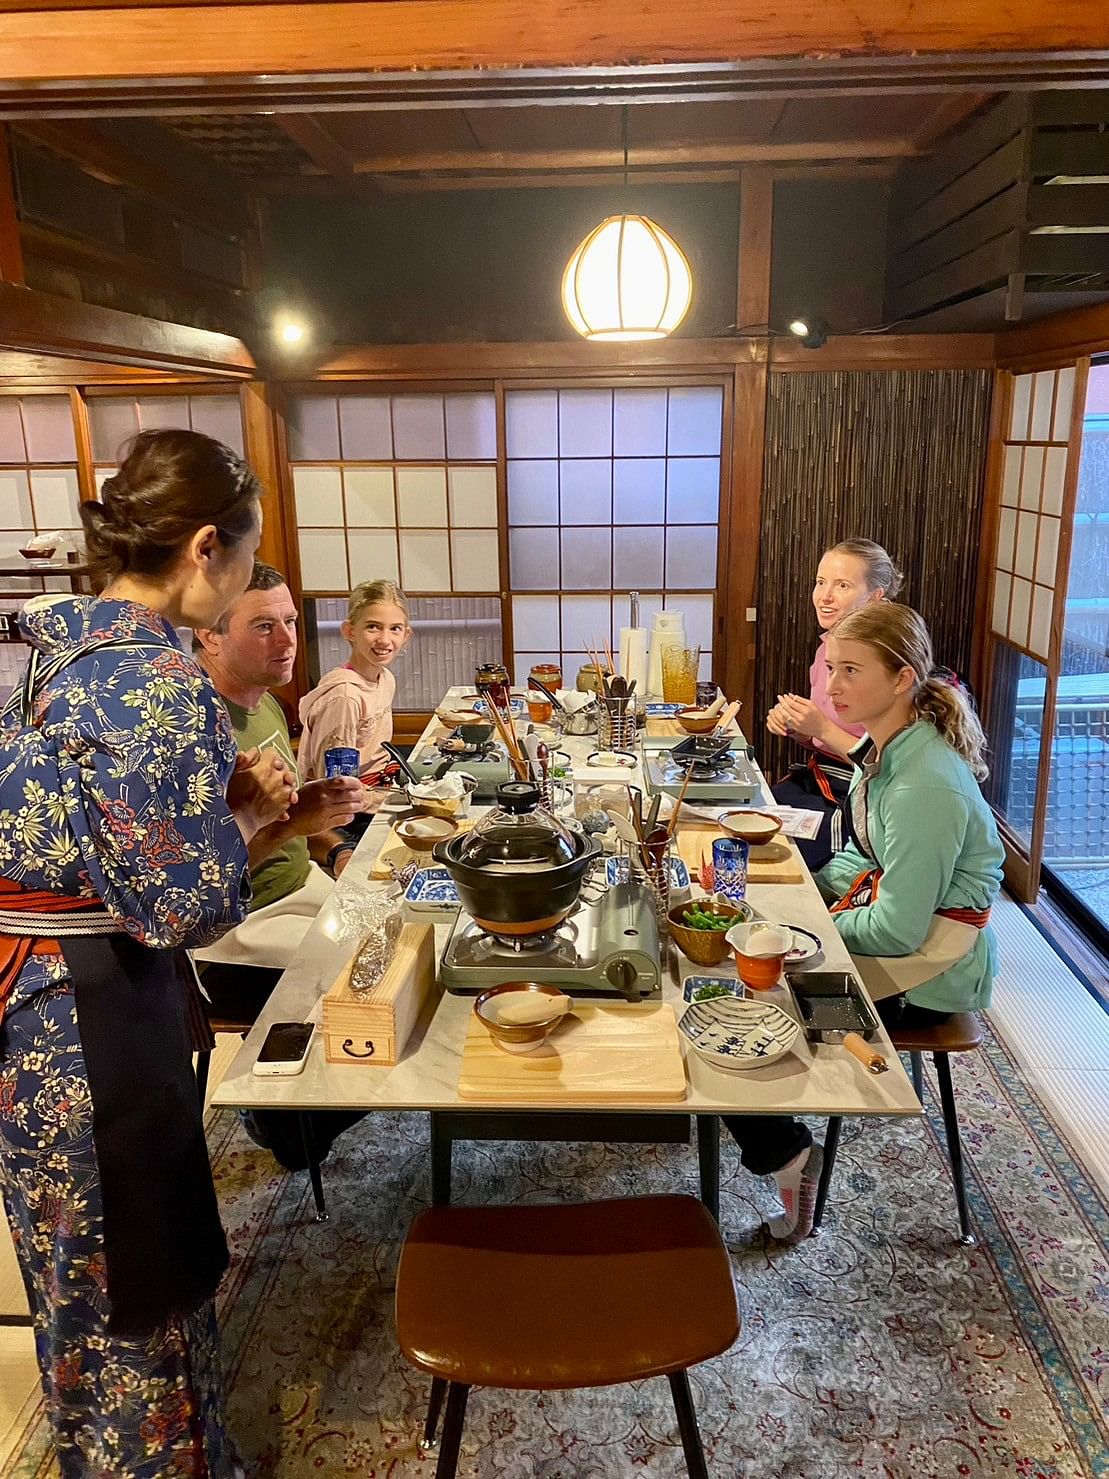 ★ Authentic Japanese cooking experience in a private traditional house, Edomae sushi, temari sushi, golden miso soup in Asakusa ★